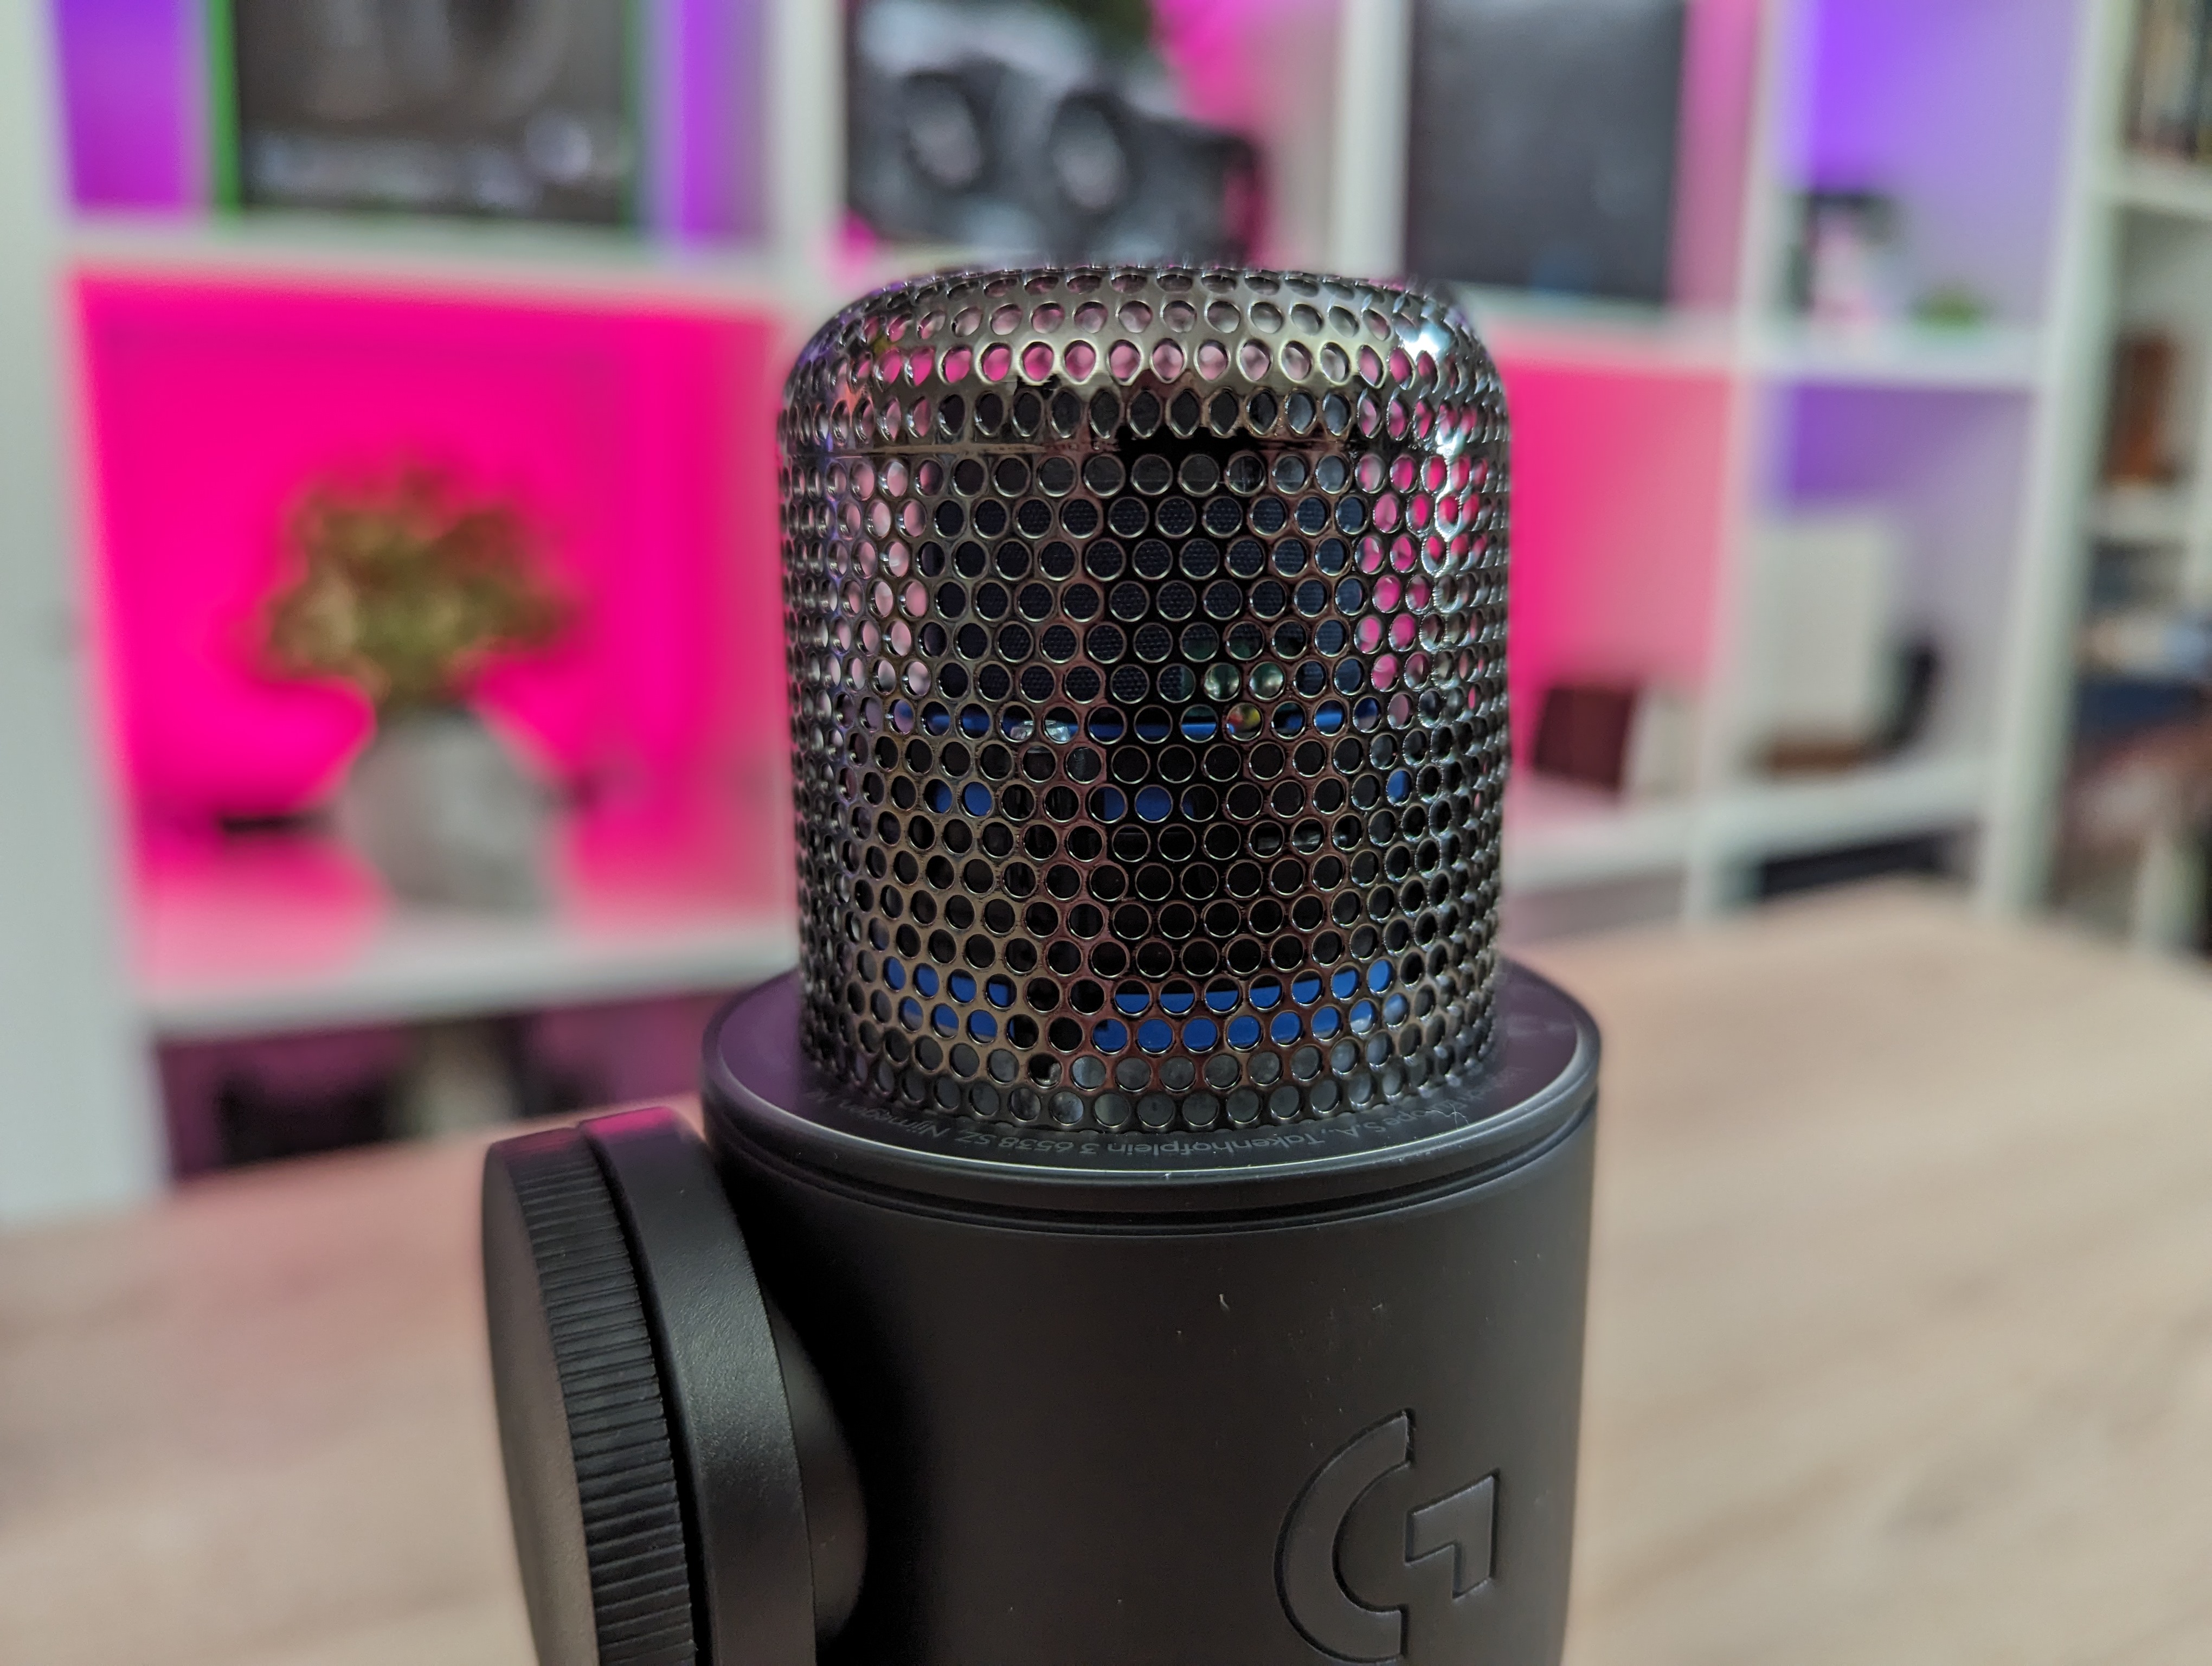 Logitech G “Yeti GX” and “Yeti Orb” RGB Gaming Microphones — Tools and Toys